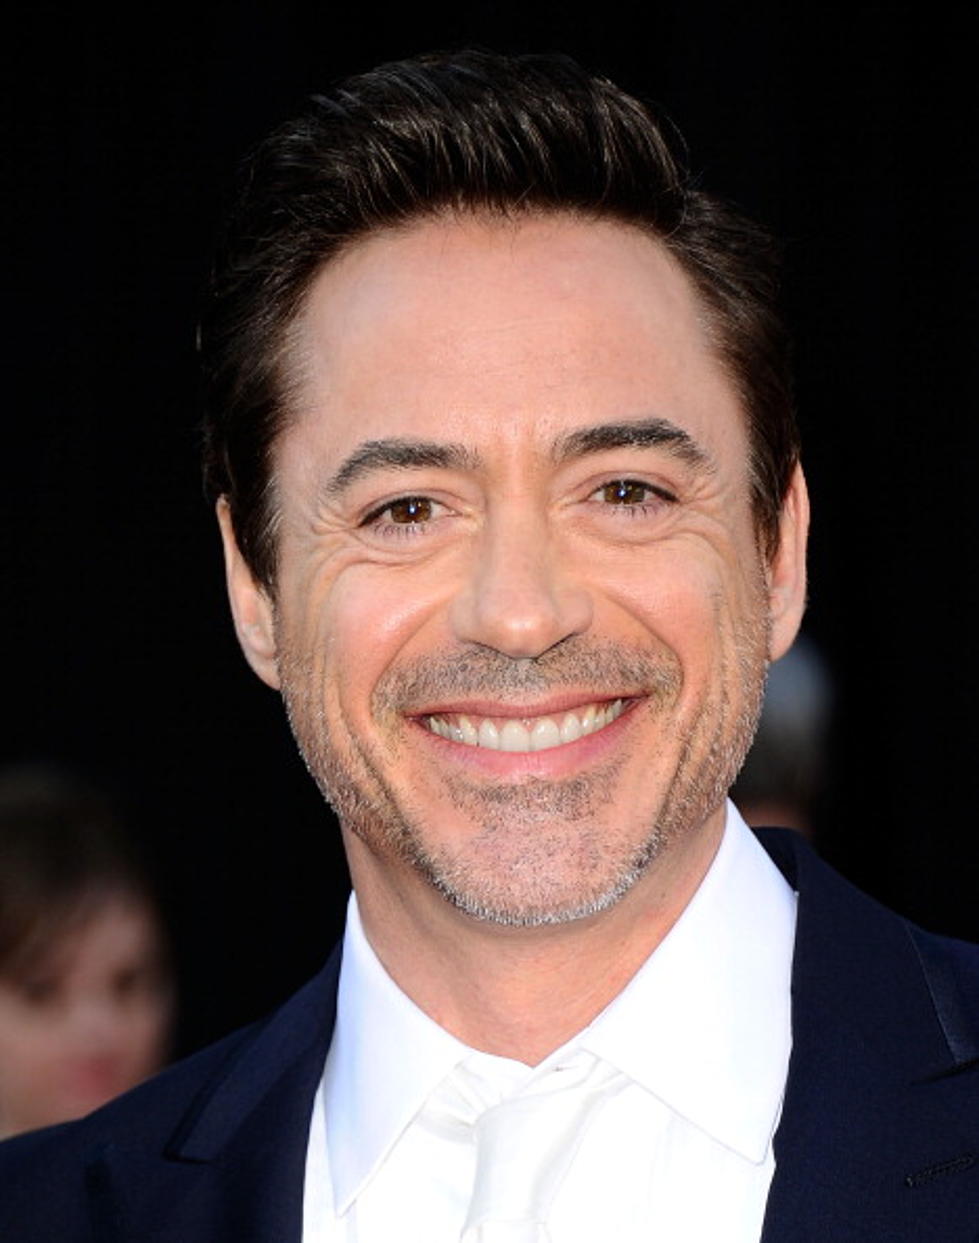 Robert Downey Jr. and Today’s Other Celebrity Birthdays 4.1.11